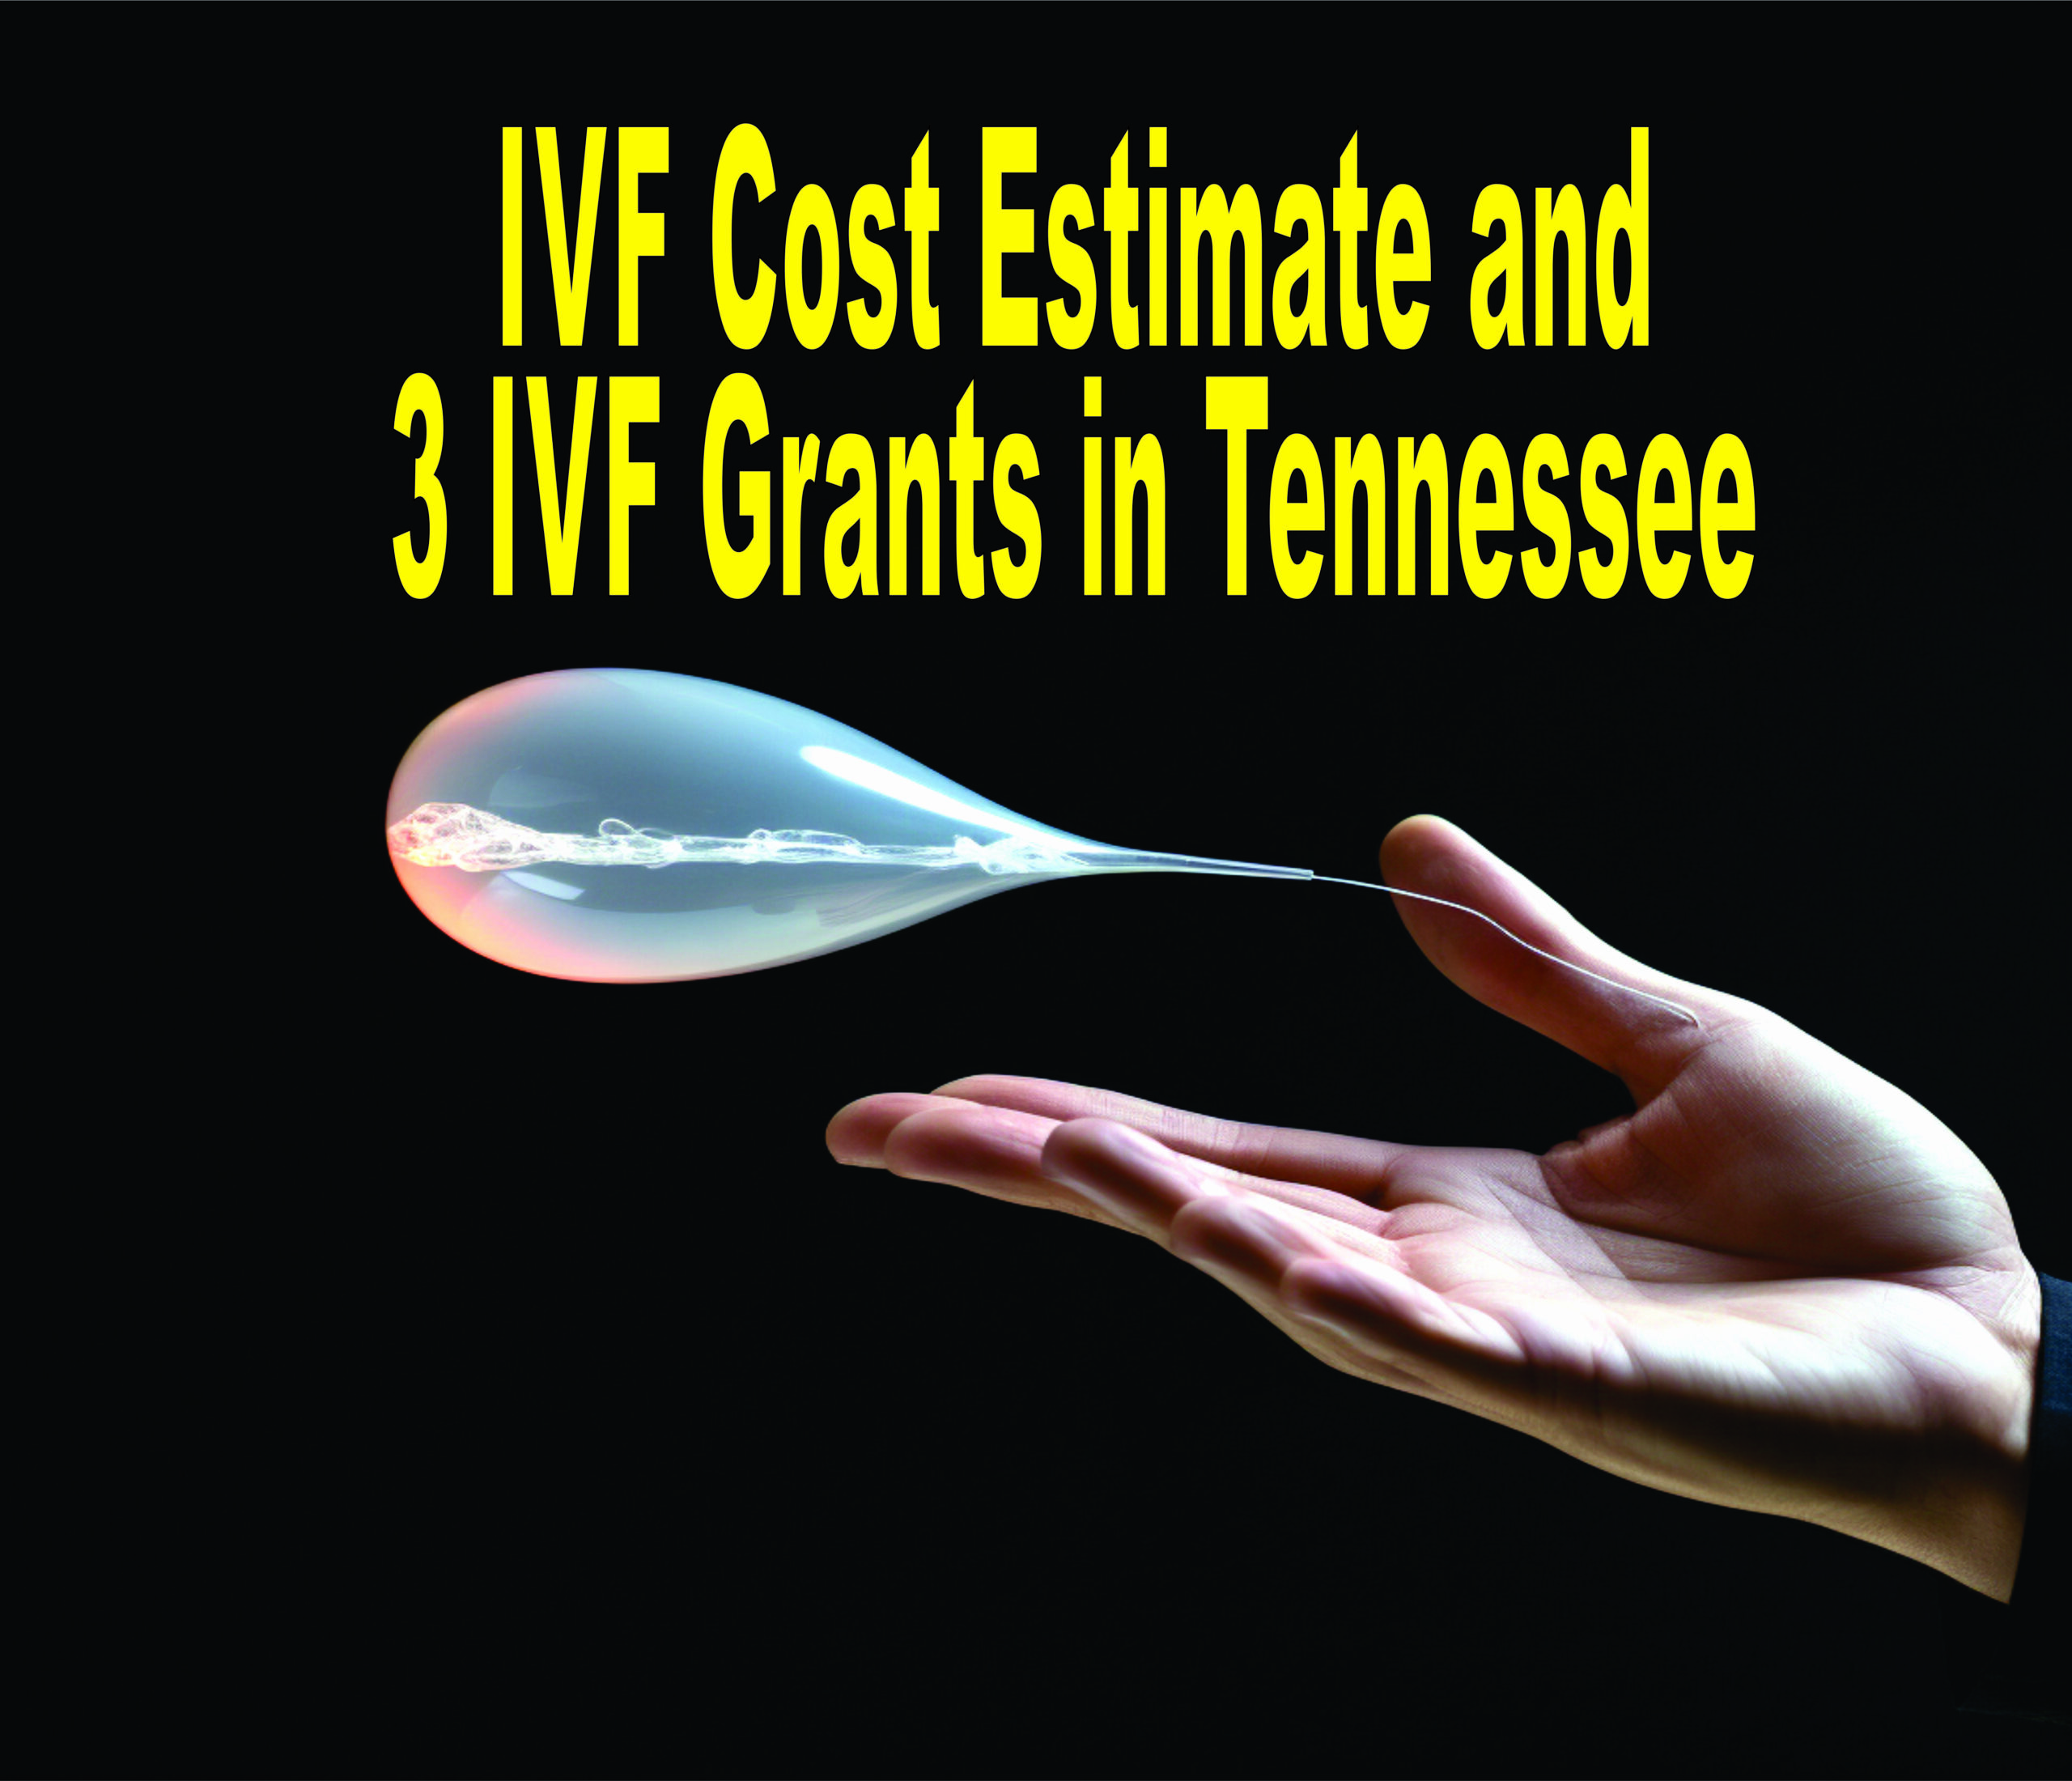 Ivf Cost Estimate And 3 Ivf Grants In Tennessee